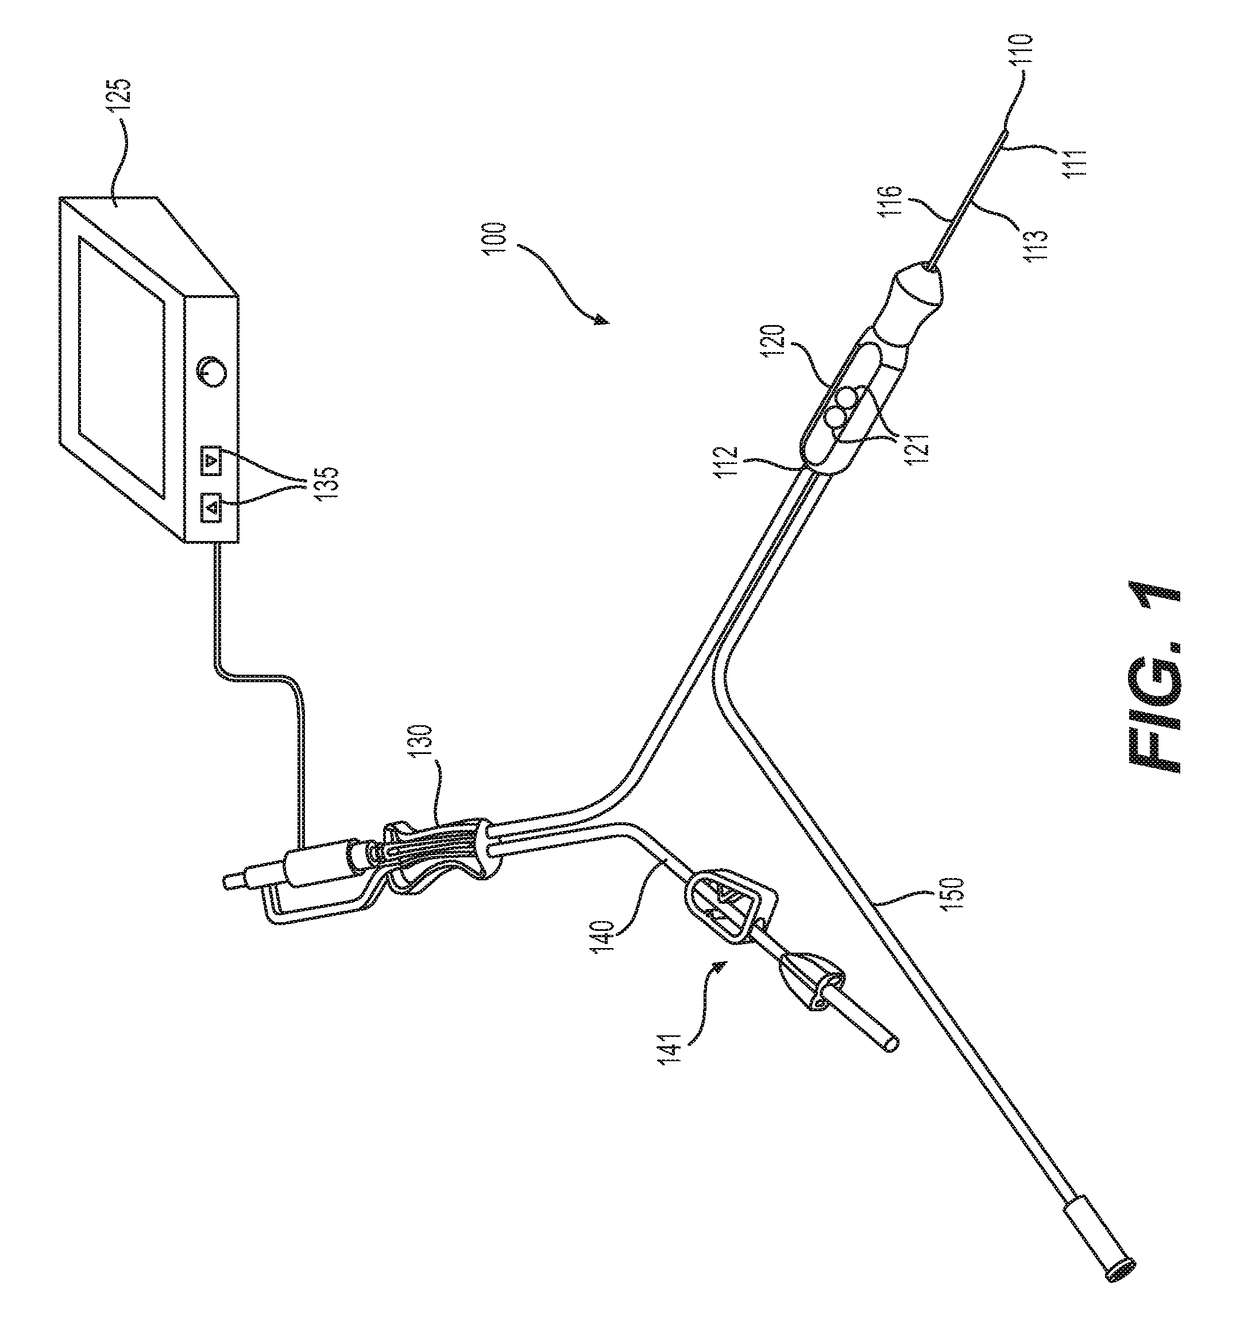 Selective tissue removal treatment device